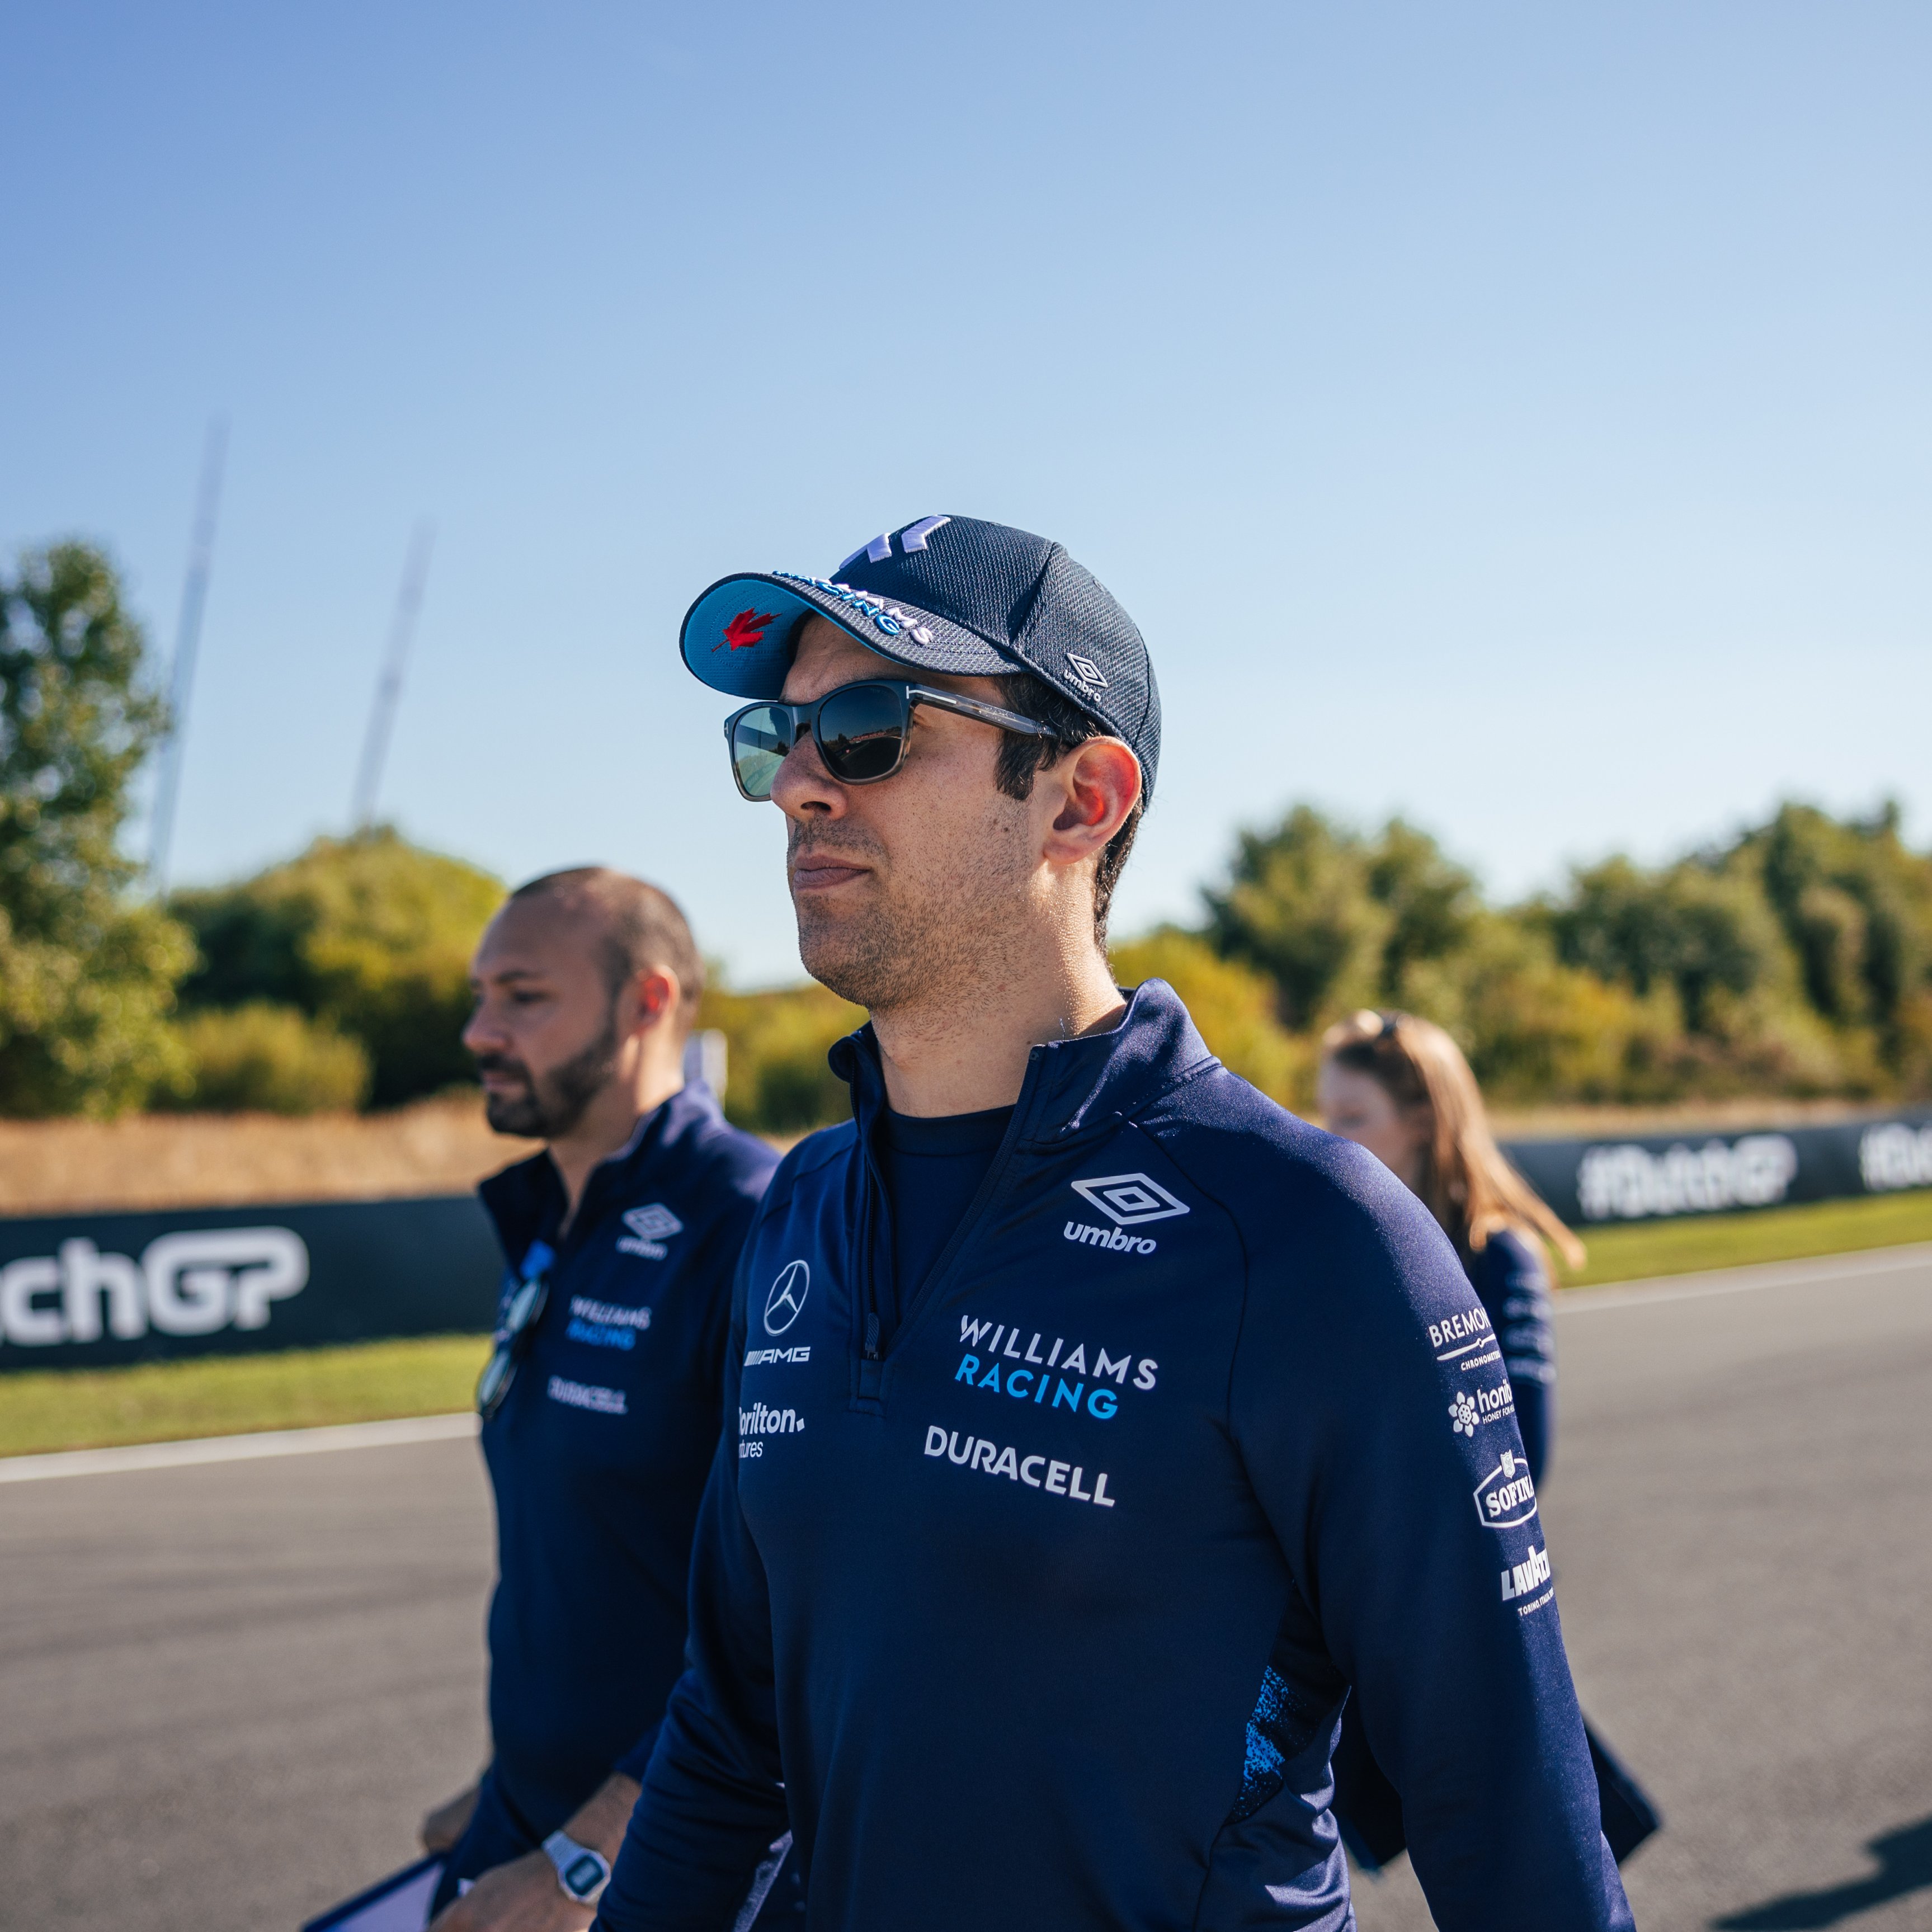 Nicholas Latifi gets ready for the 2022 Dutch Grand Prix weekend with a tra...